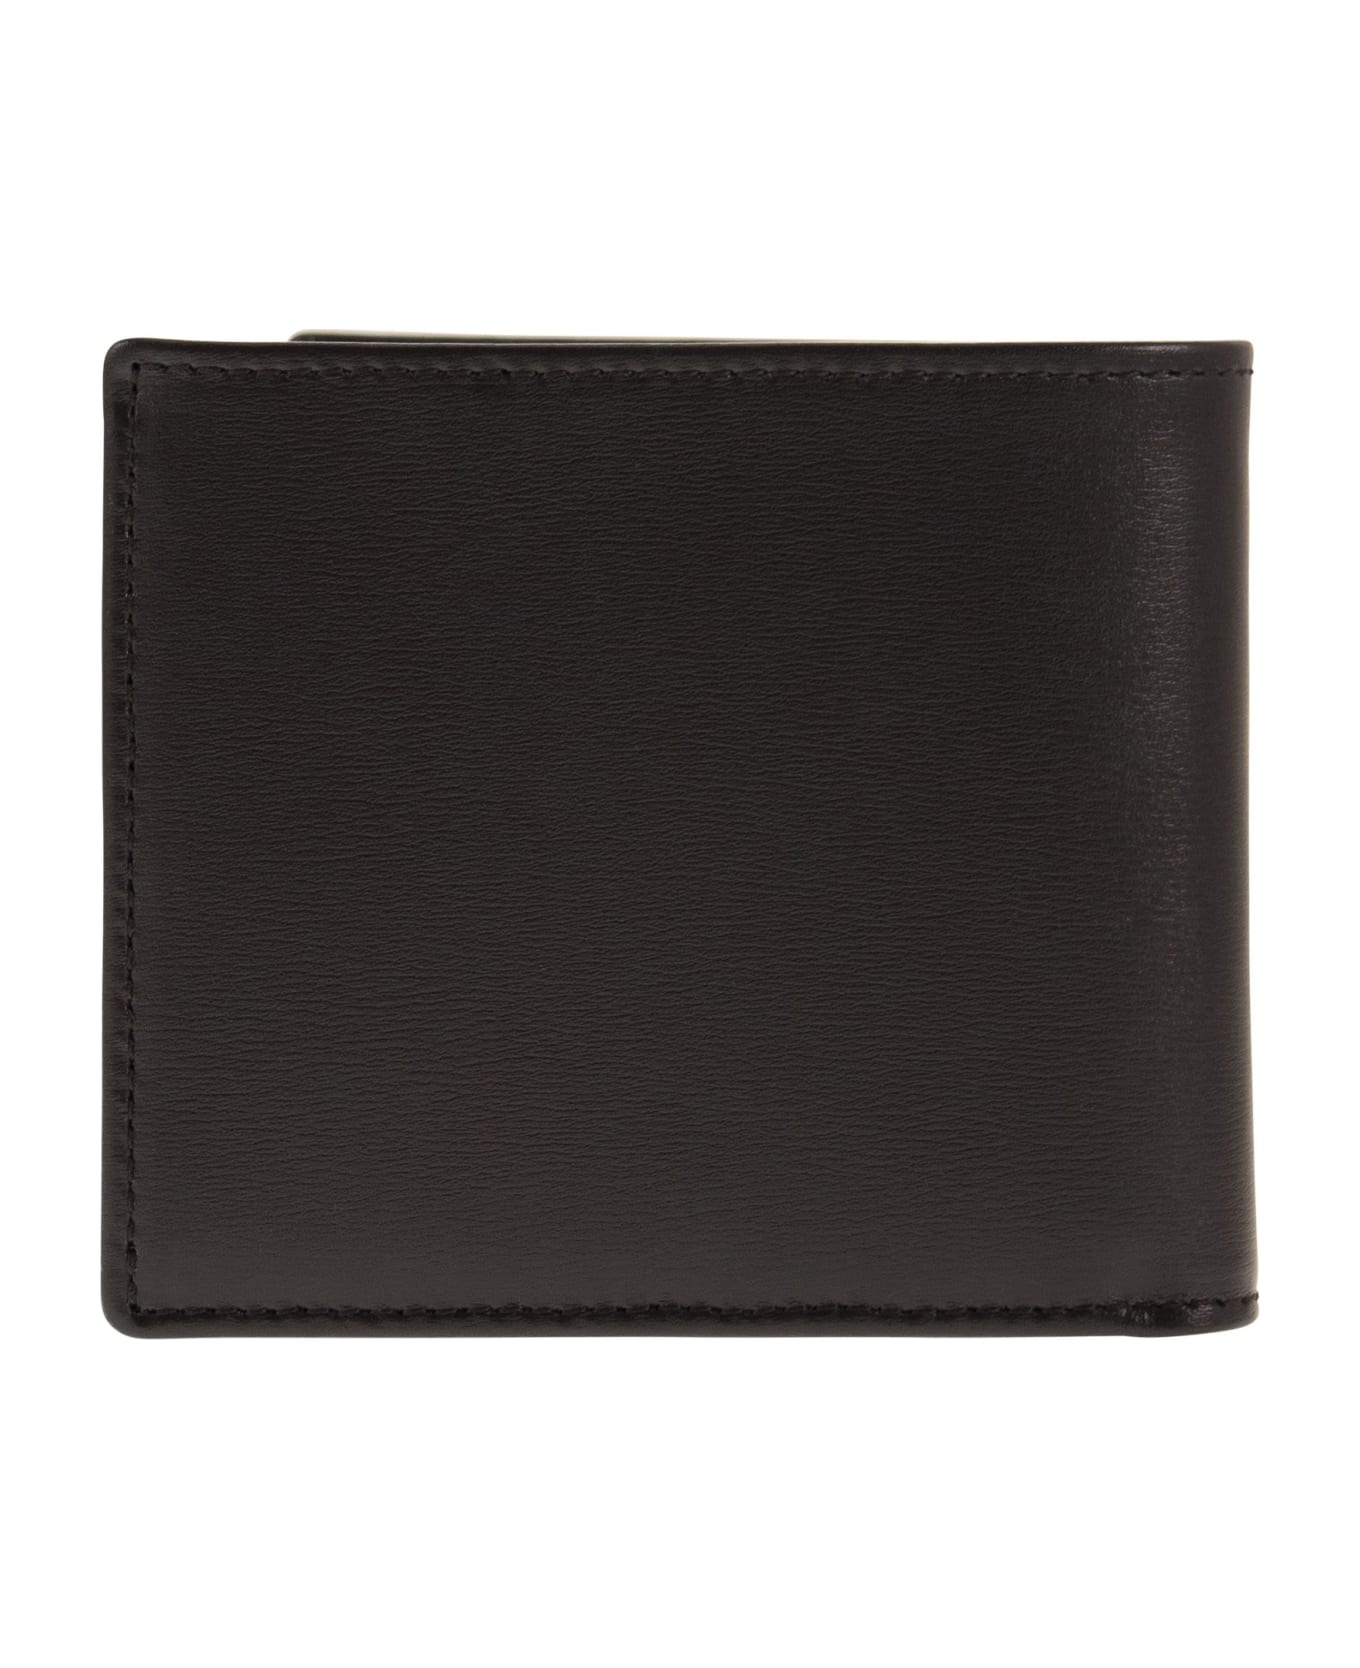 Tod's Leather Wallet With Logo - Dark Brown 財布